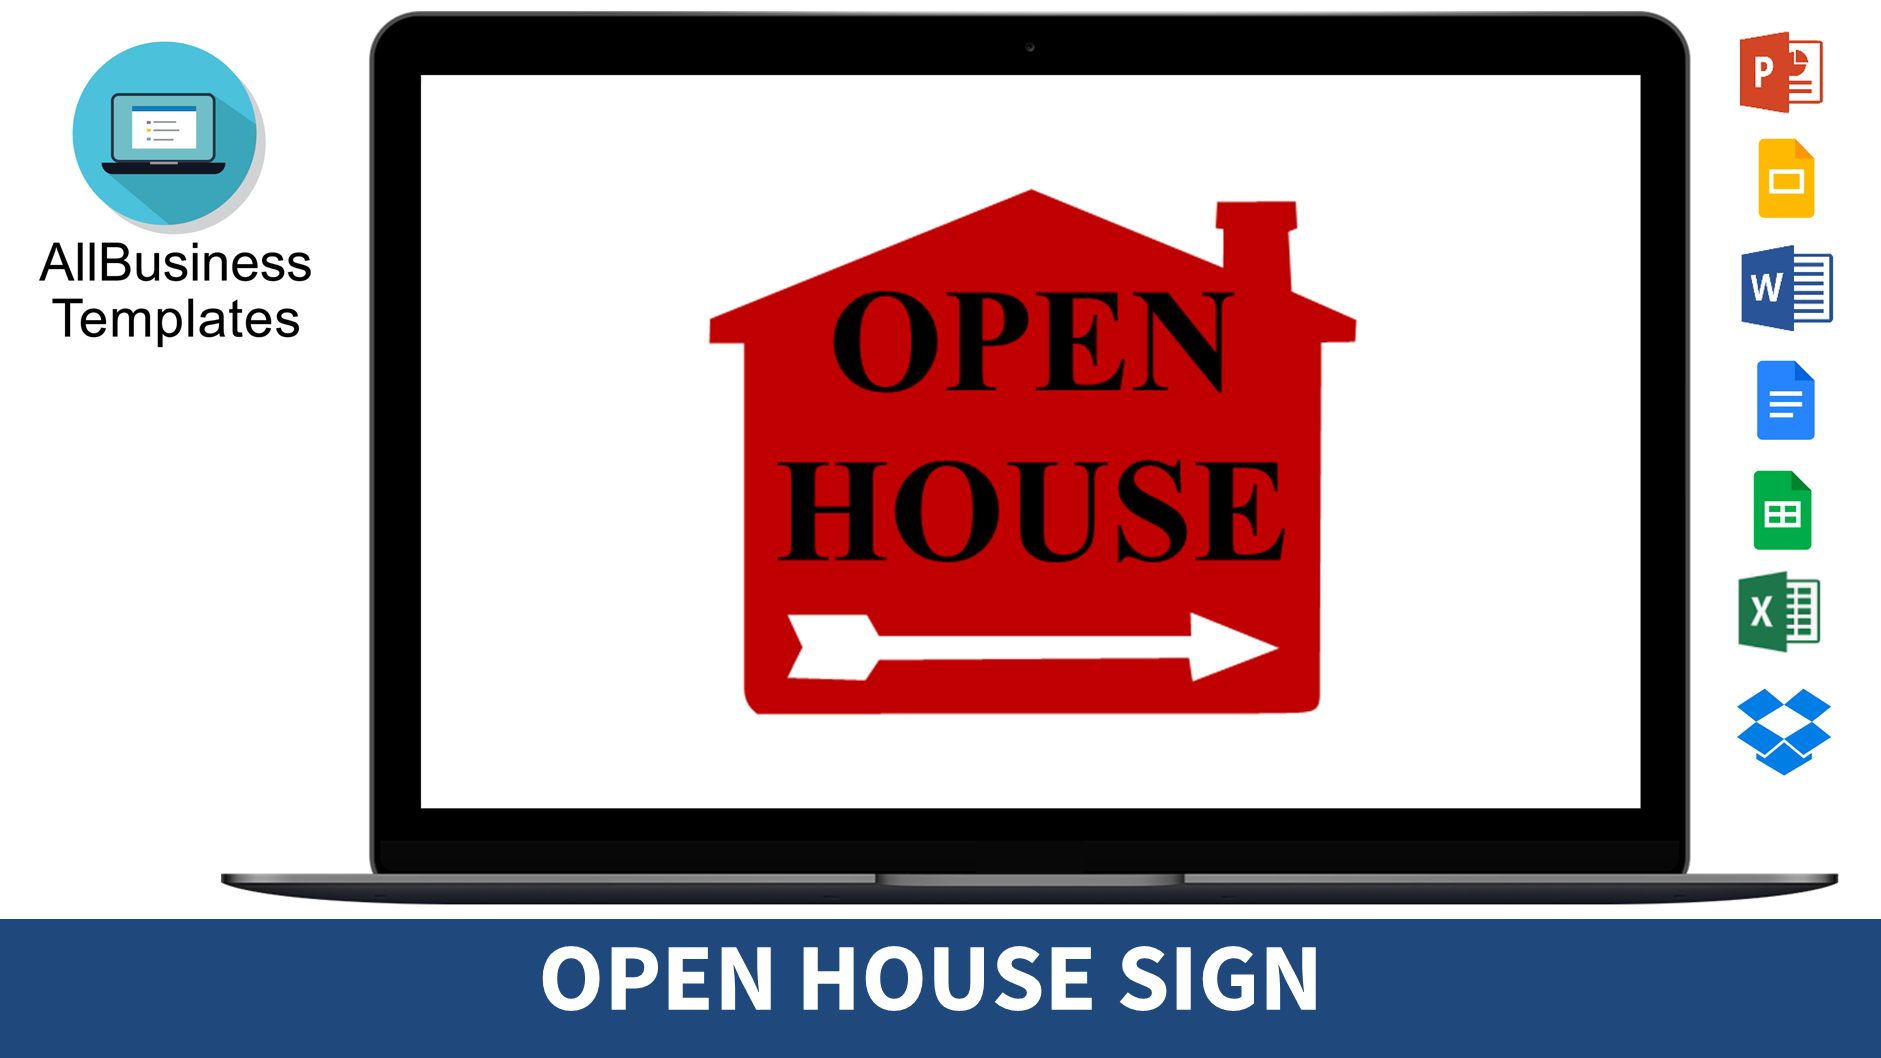 Open House Sign main image